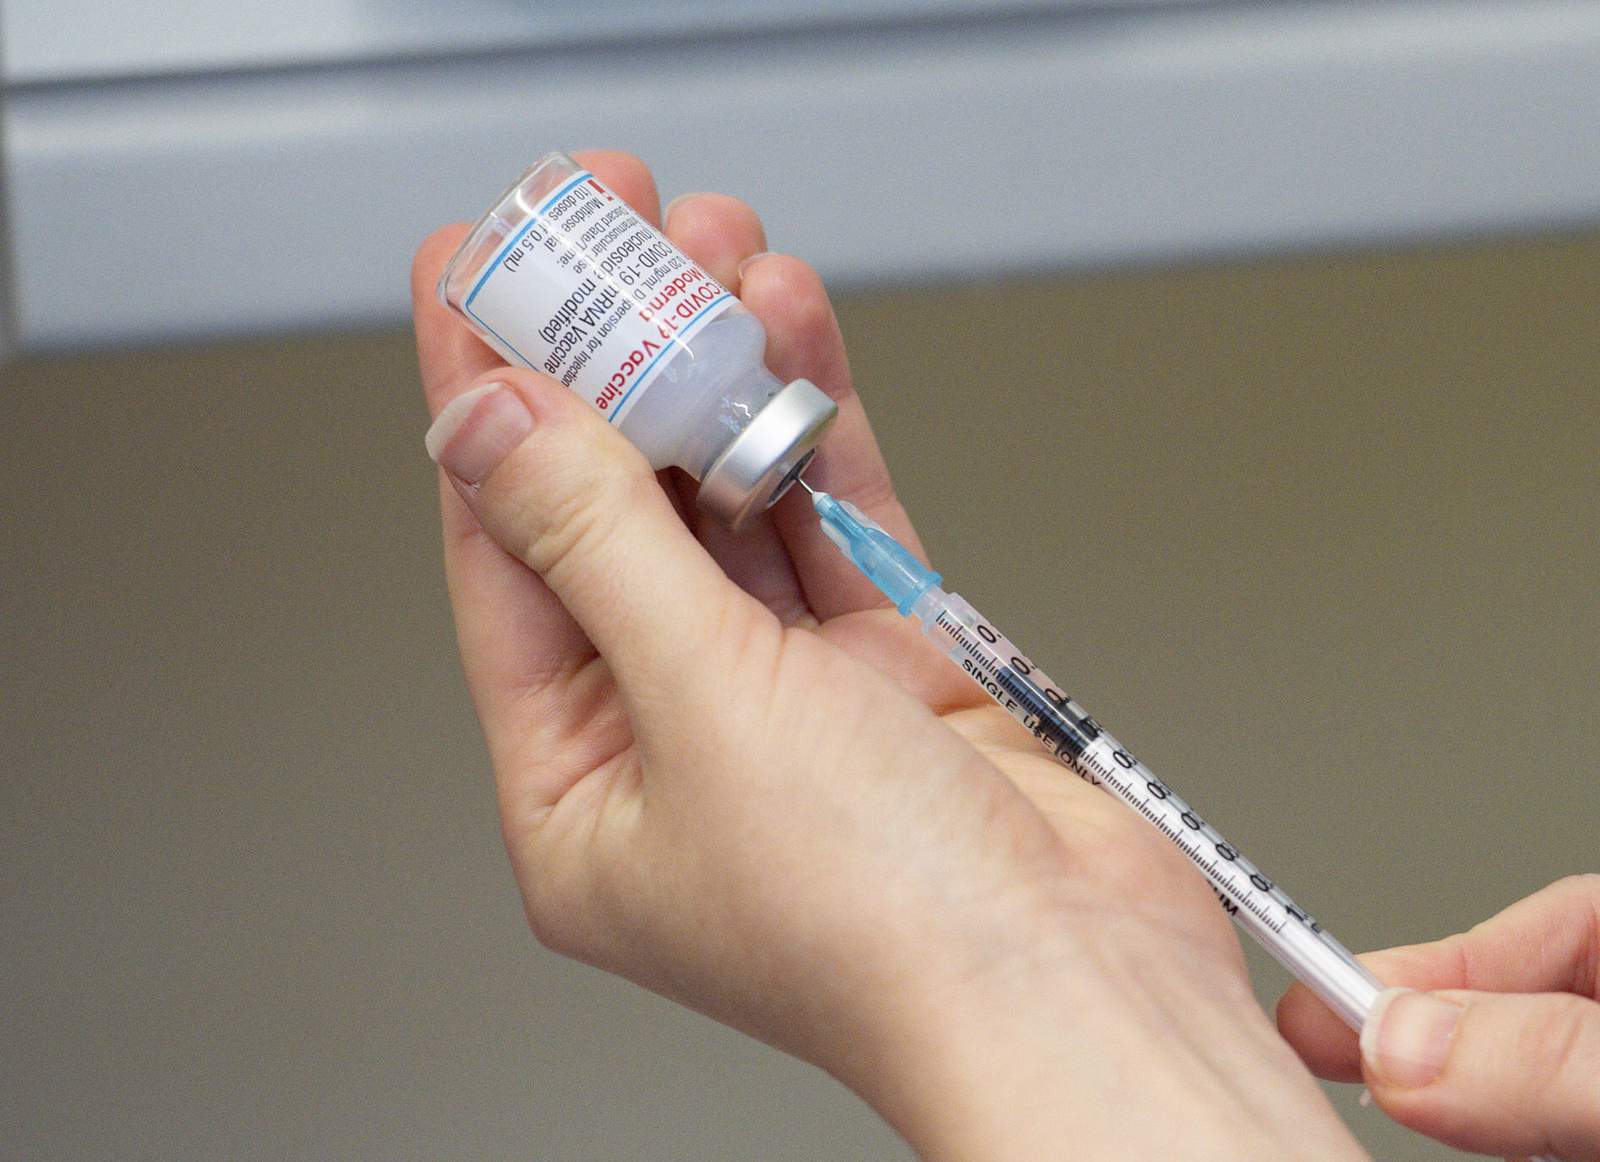 Wayne County is expanding COVID vaccine clinics to 17 communities: What You Know